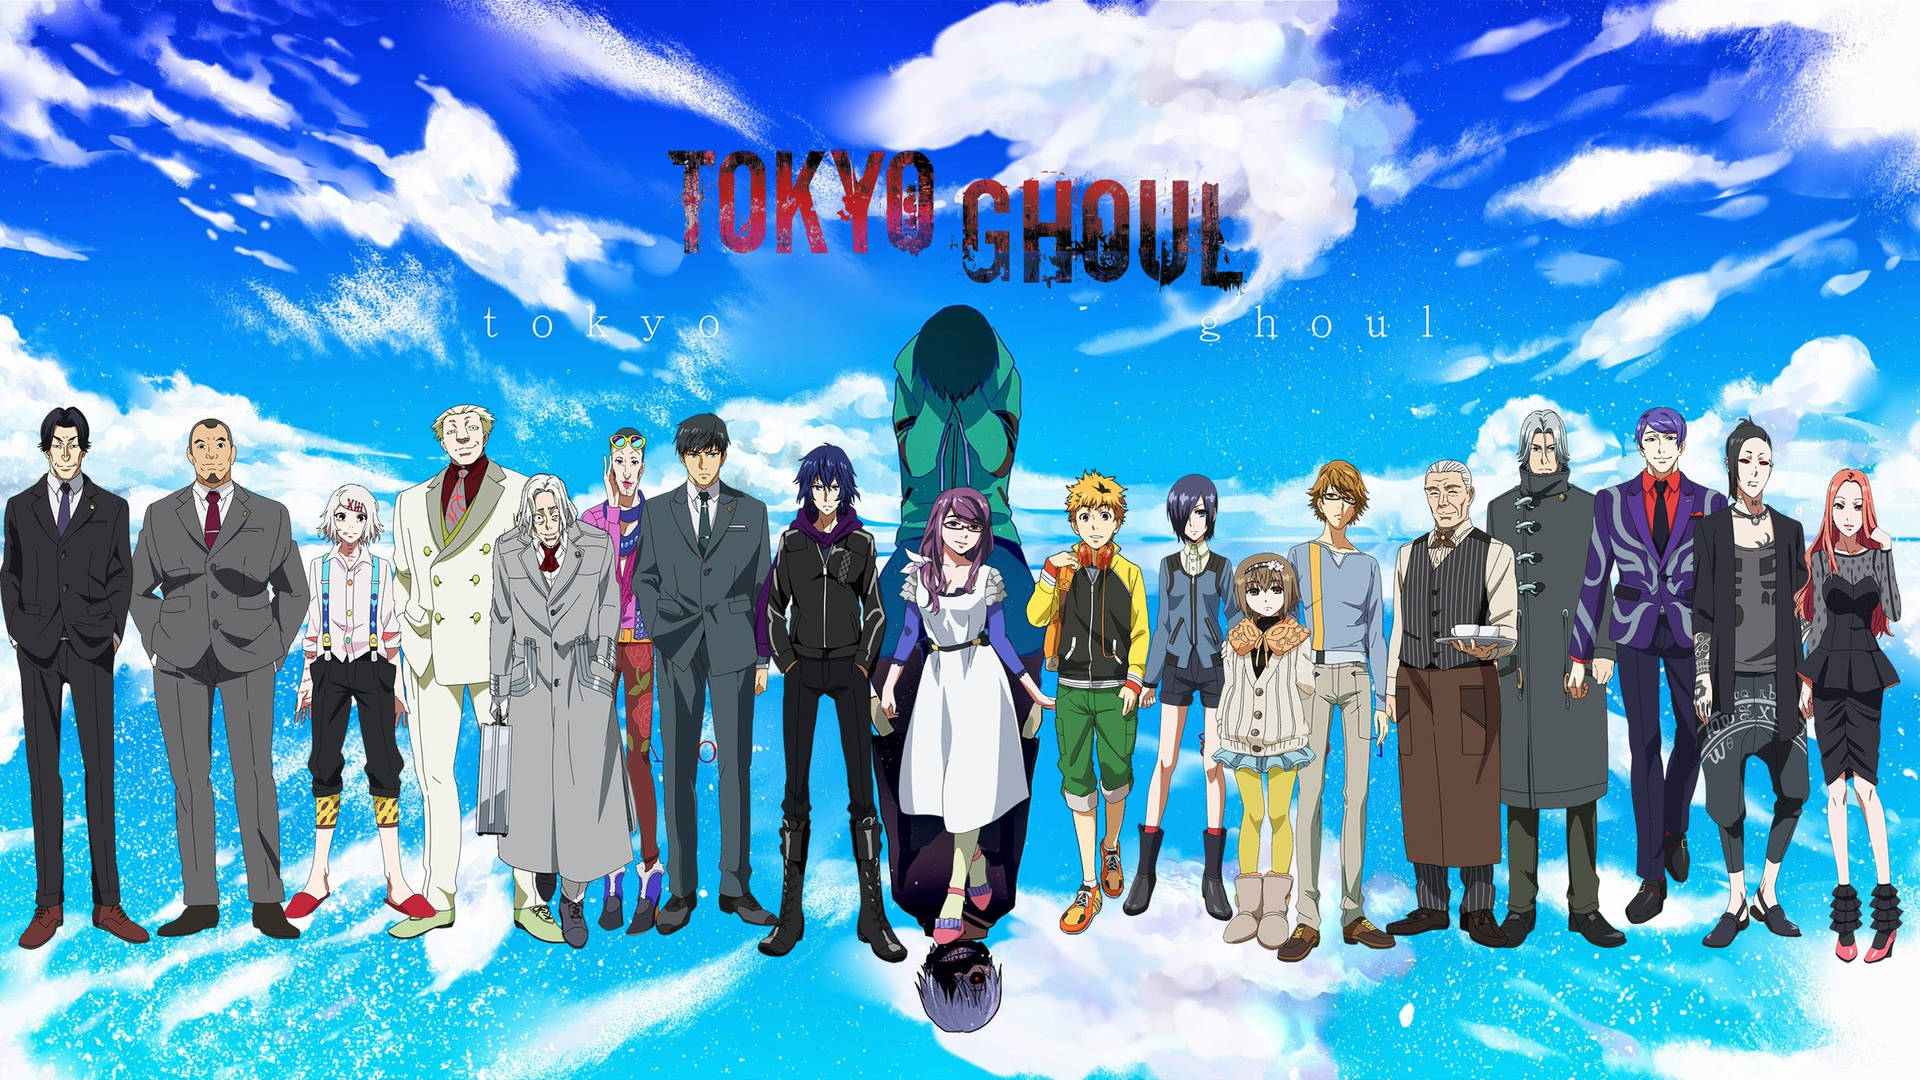 Tokyo Ghoul Characters Blue Sky Poster Wallpaper